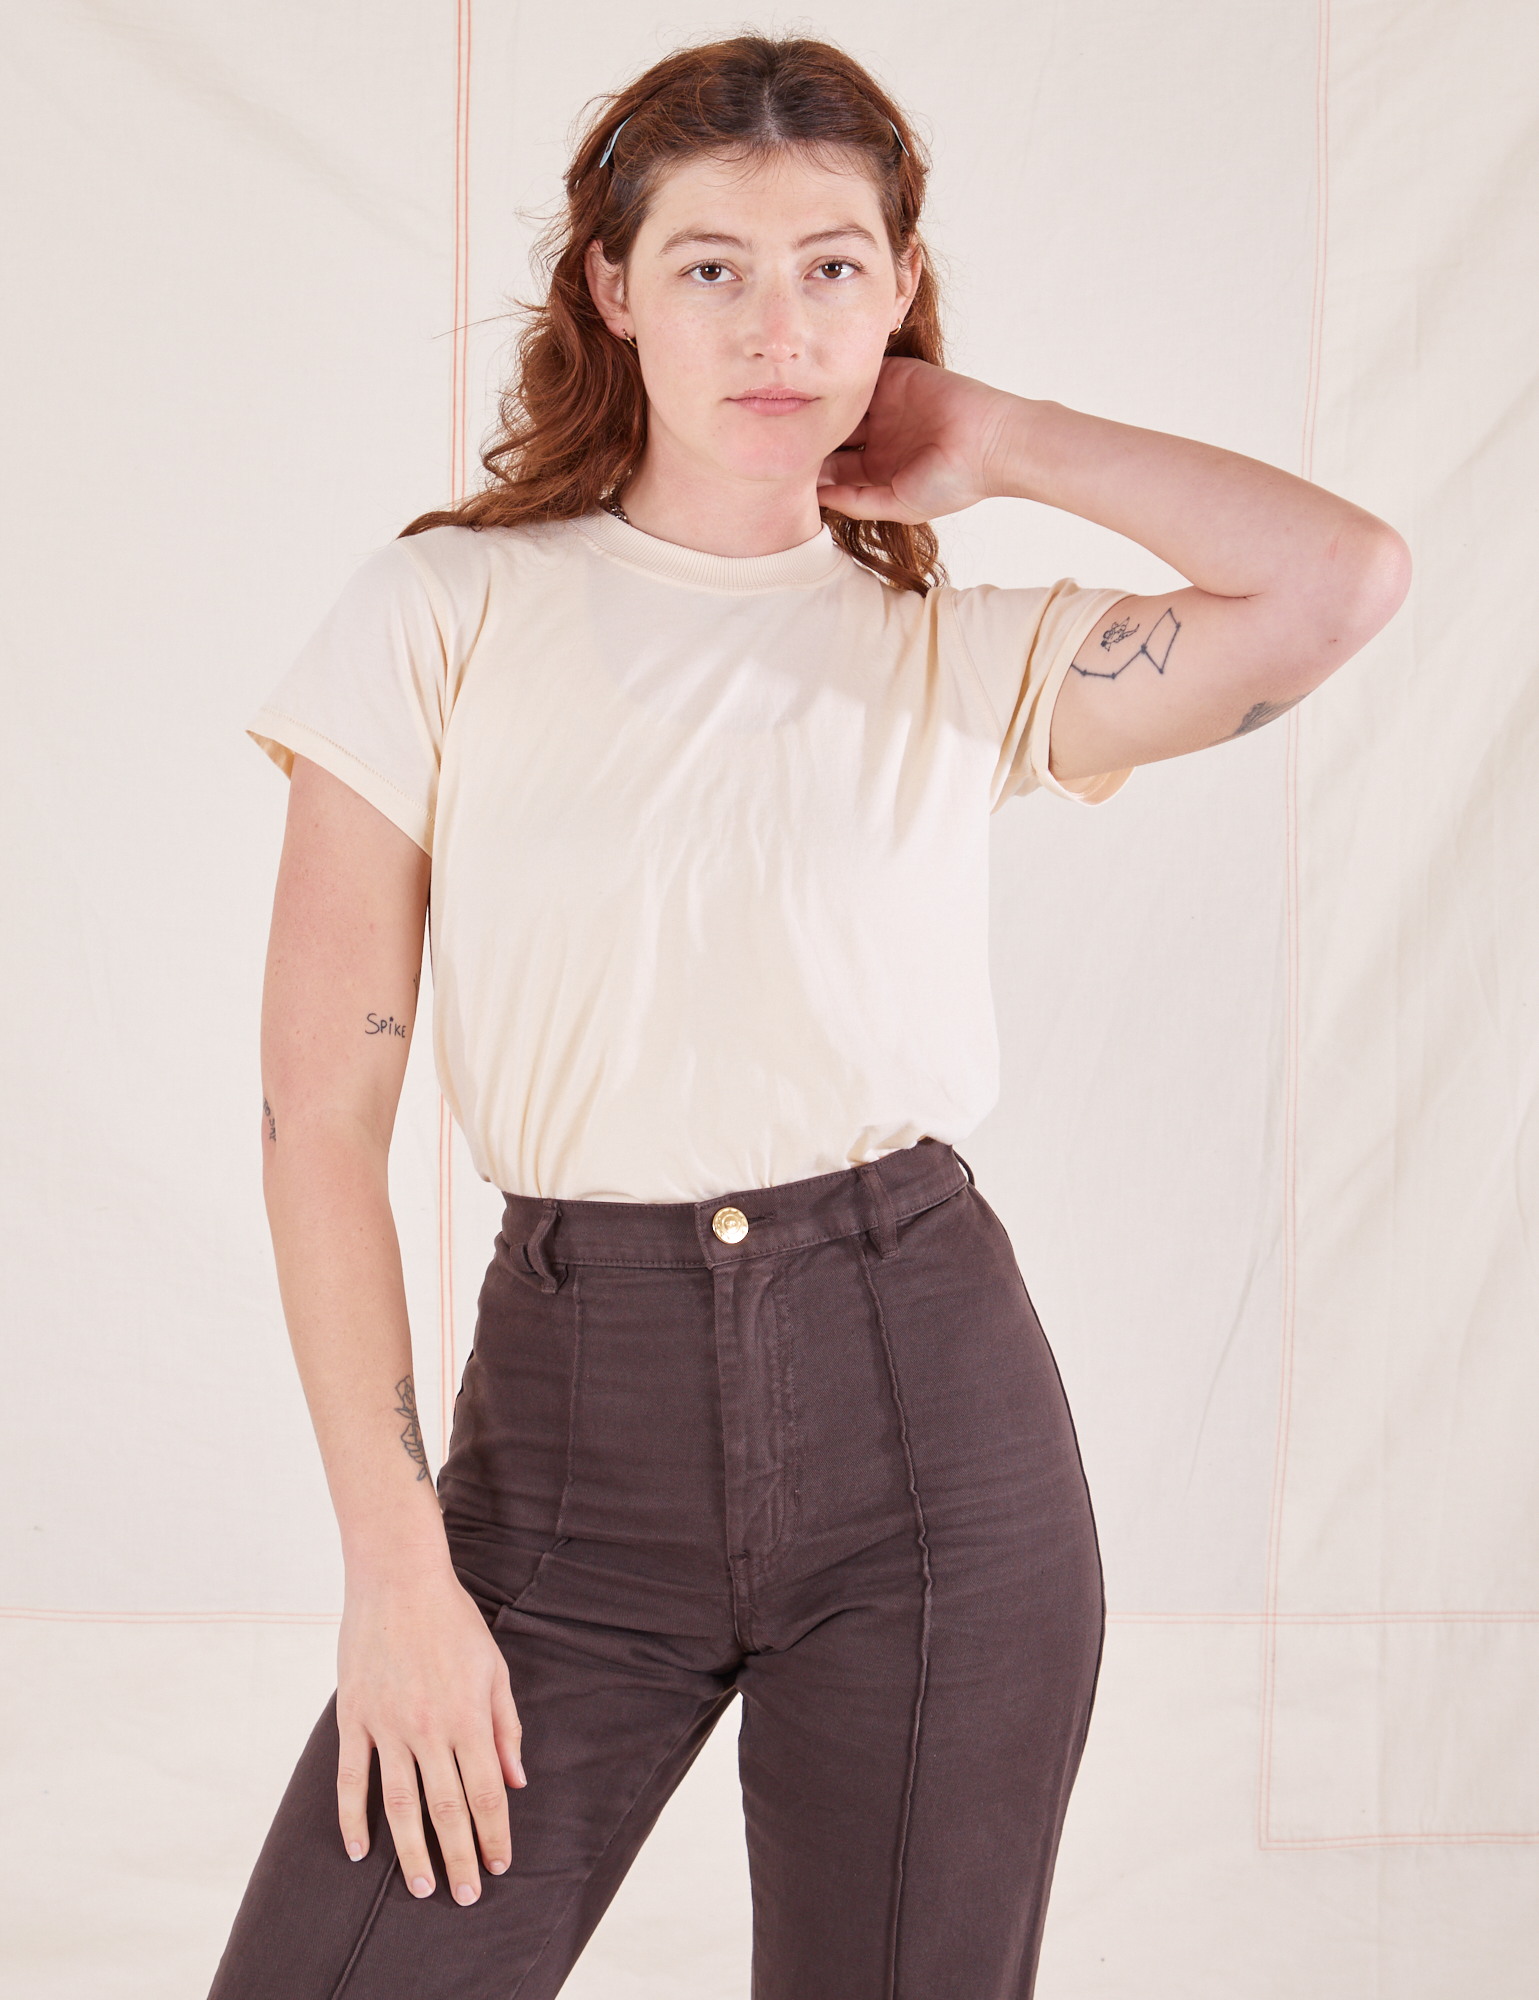 Alex is wearing Organic Vintage Tee in Sunshine Yellow tucked into espresso brown Western Pants